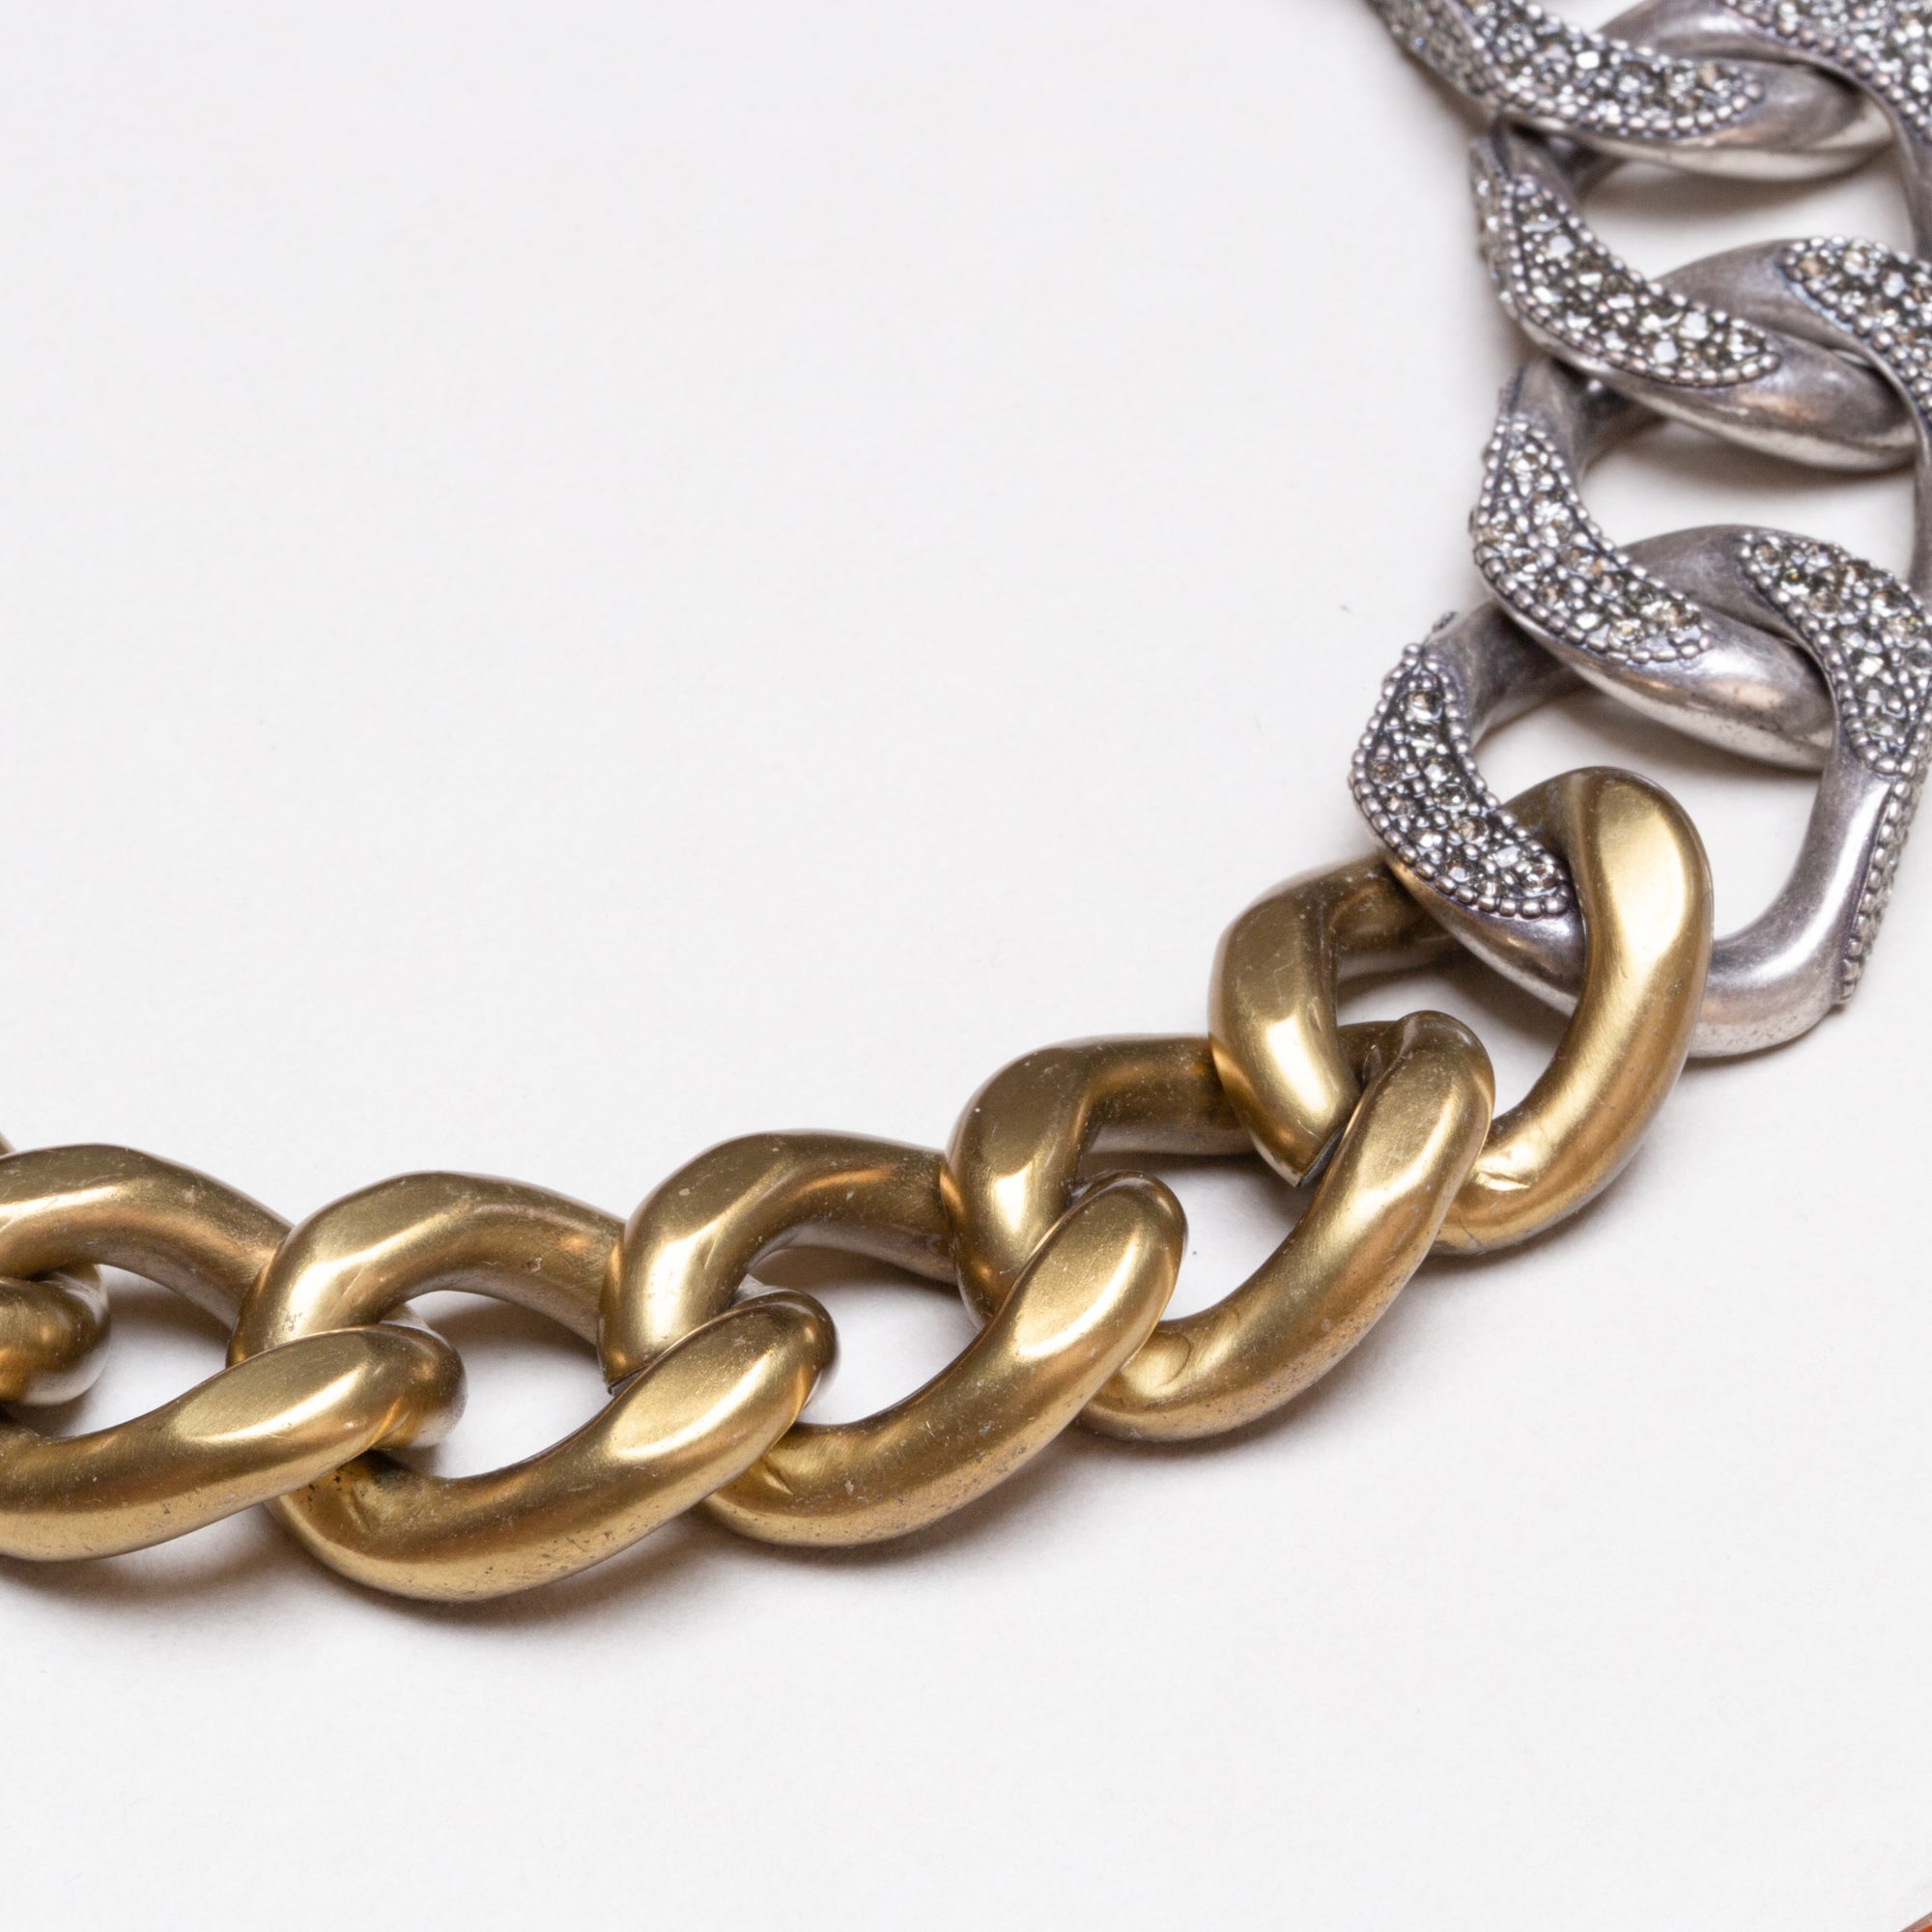 Vintage Lanvin Two-Tone Chain Necklace with Rhinestones